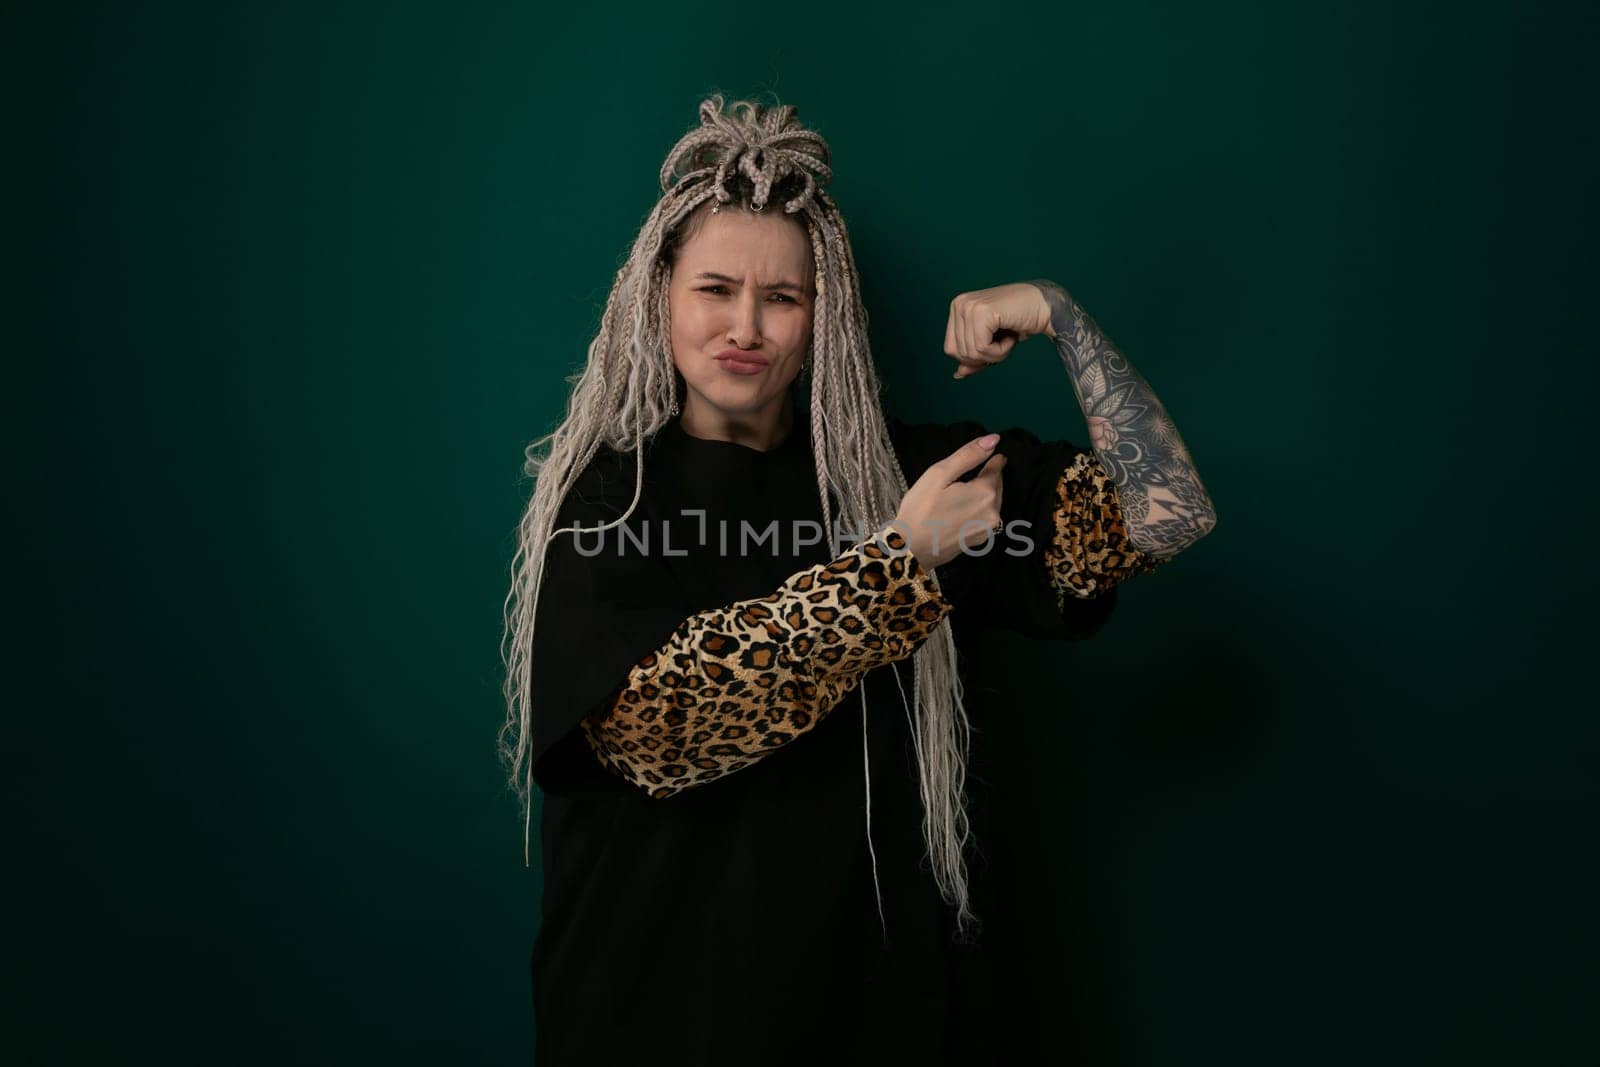 A woman with long hair is shown wearing a leopard print arm sleeve. Her hair flows down past her shoulders, framing her face. The leopard print sleeve covers her arm, adding a bold and edgy touch to her outfit.